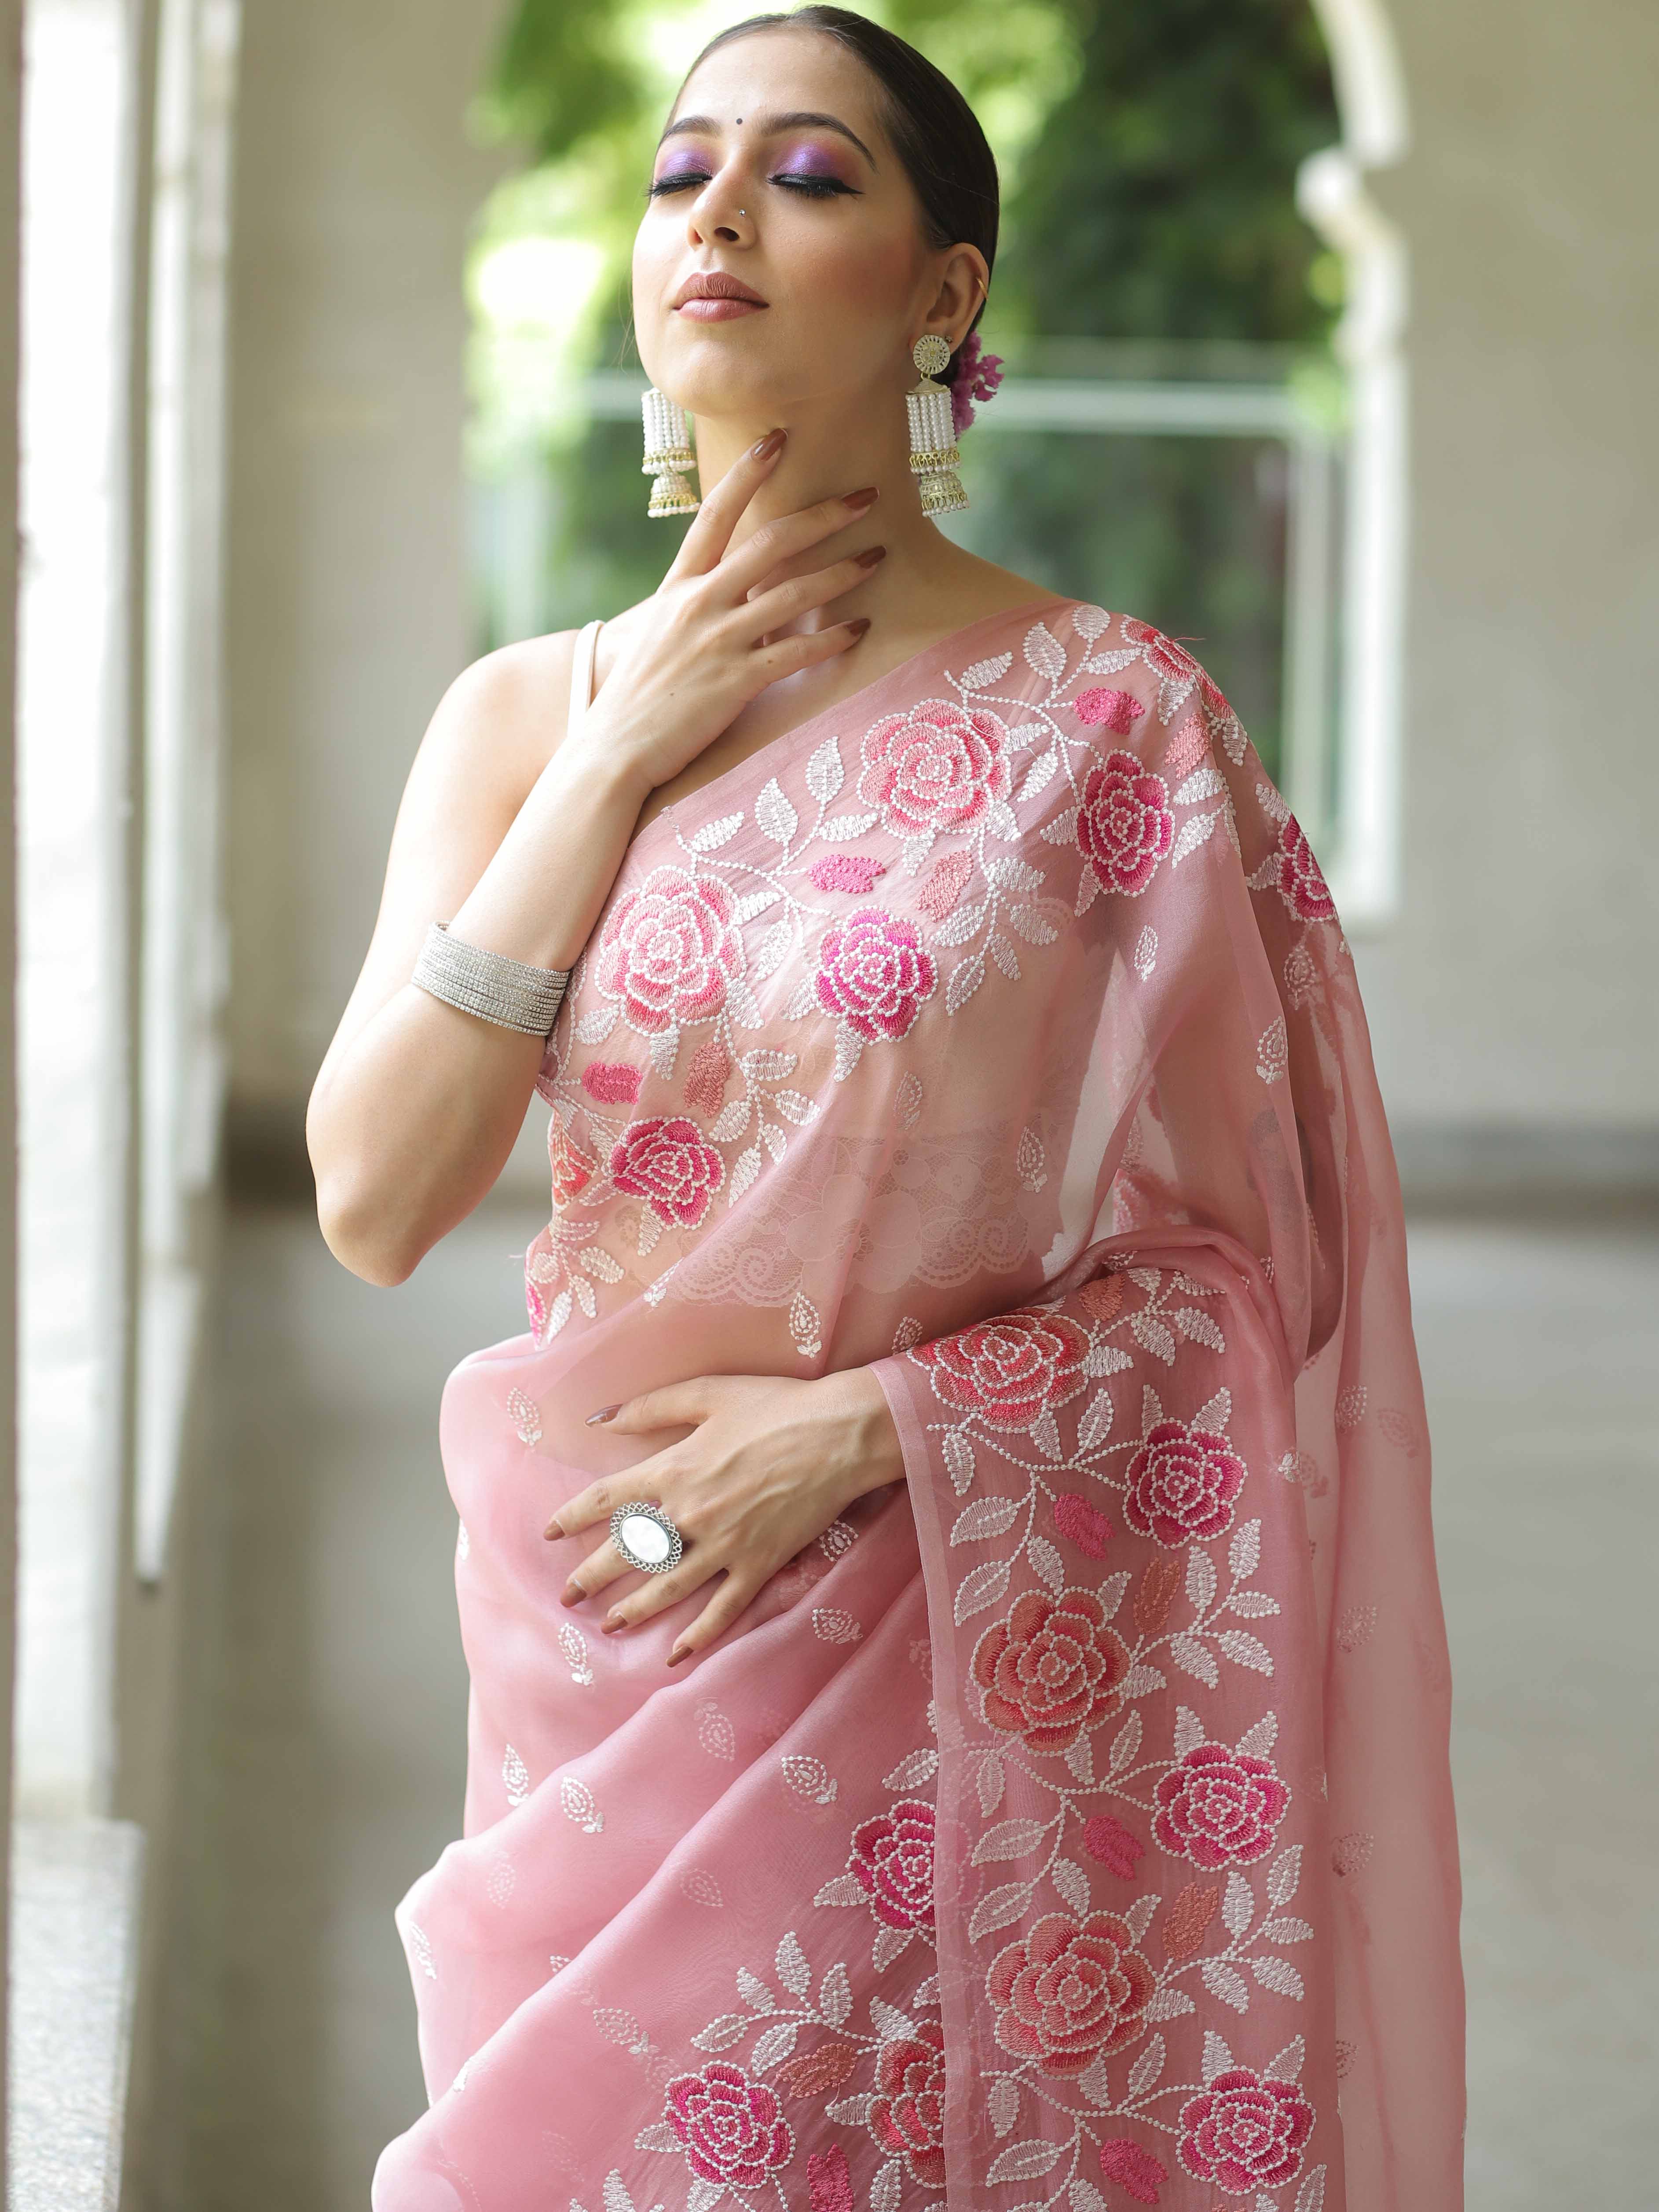 Pink Organza Silk Saree with Resham Floral Embroidery Colorful Saree